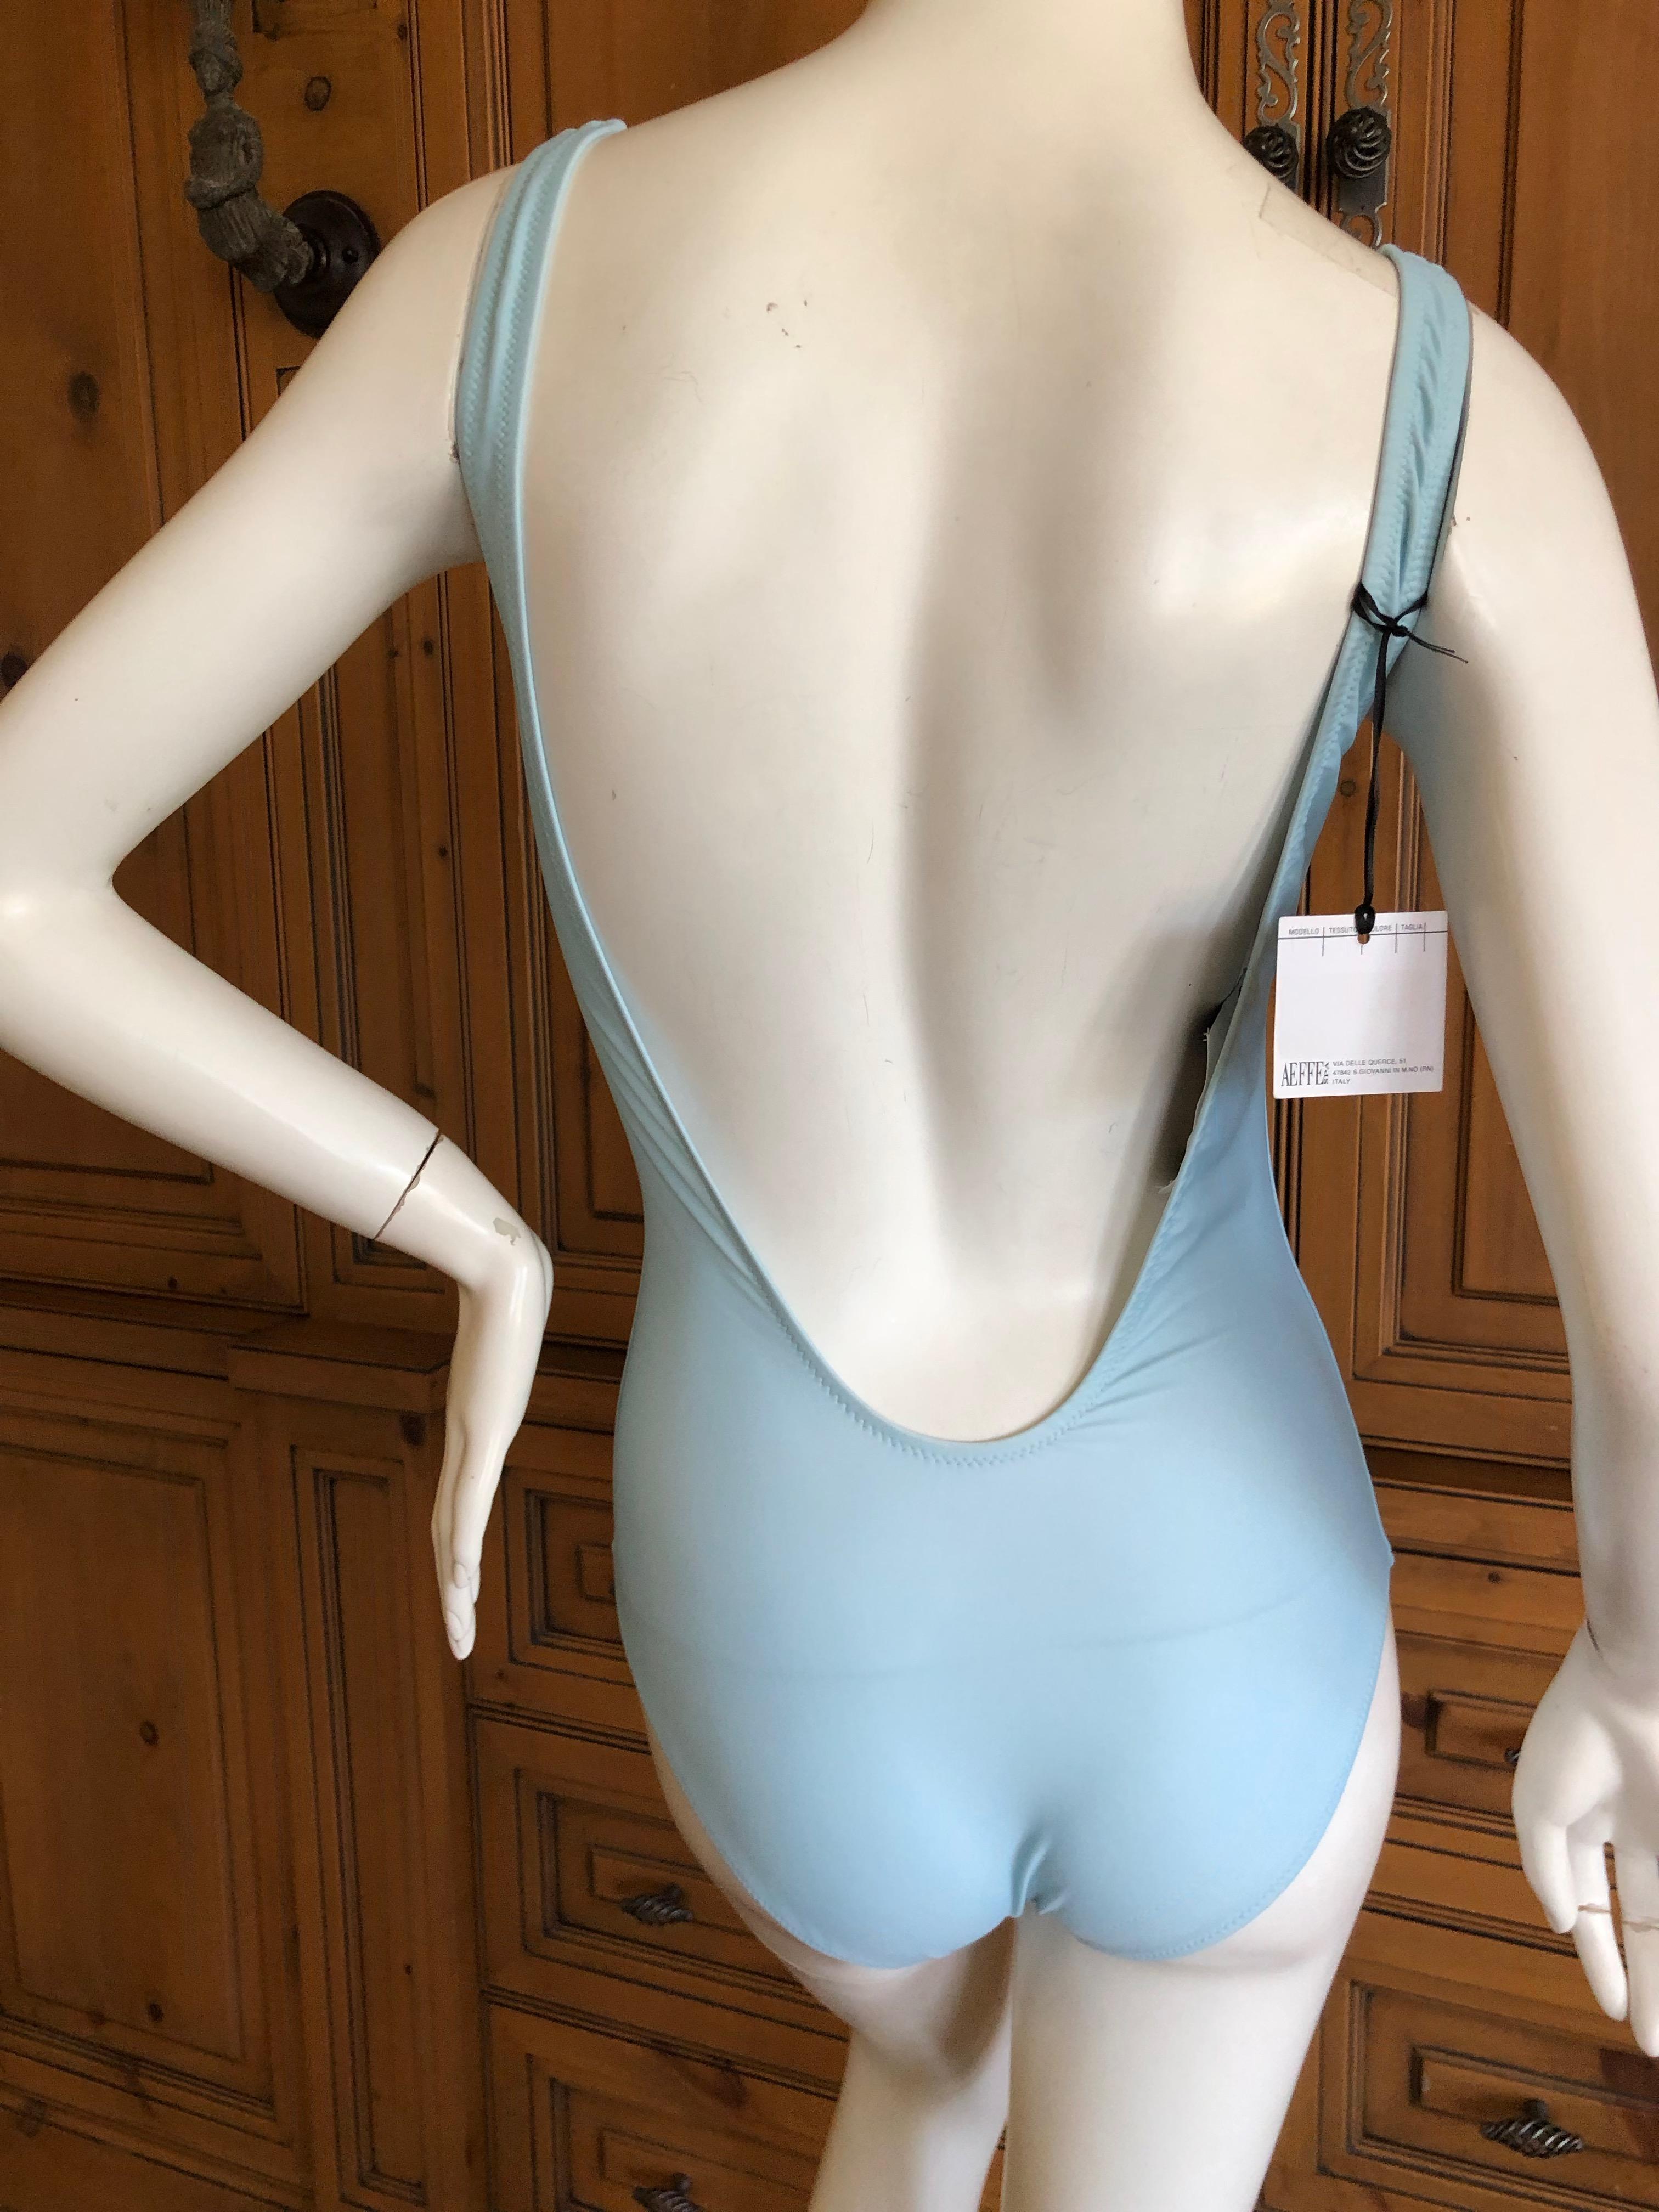 Moschino Couture One Piece Swim Suit New with Tags
SIze M-L
Bust 36